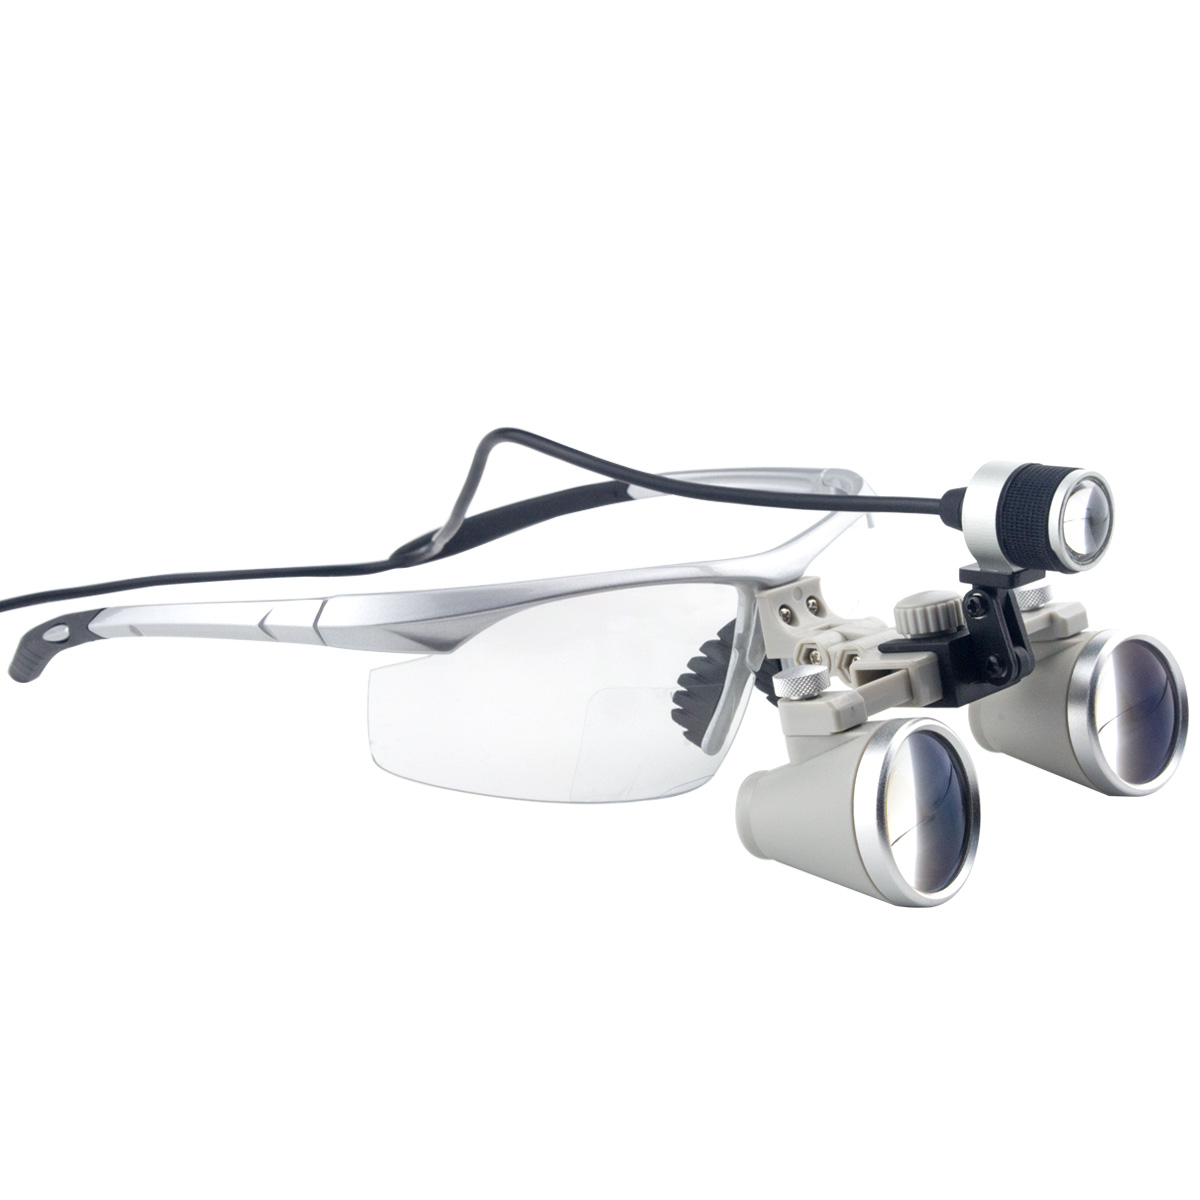 3.5x Magnification Professional Loupes with Silver BP Sports Frame and Mounted LED Head Light for Dental, Surgical, Jeweler, or Hobby | Adjustable Pupil Distance Model #CH350AXSL